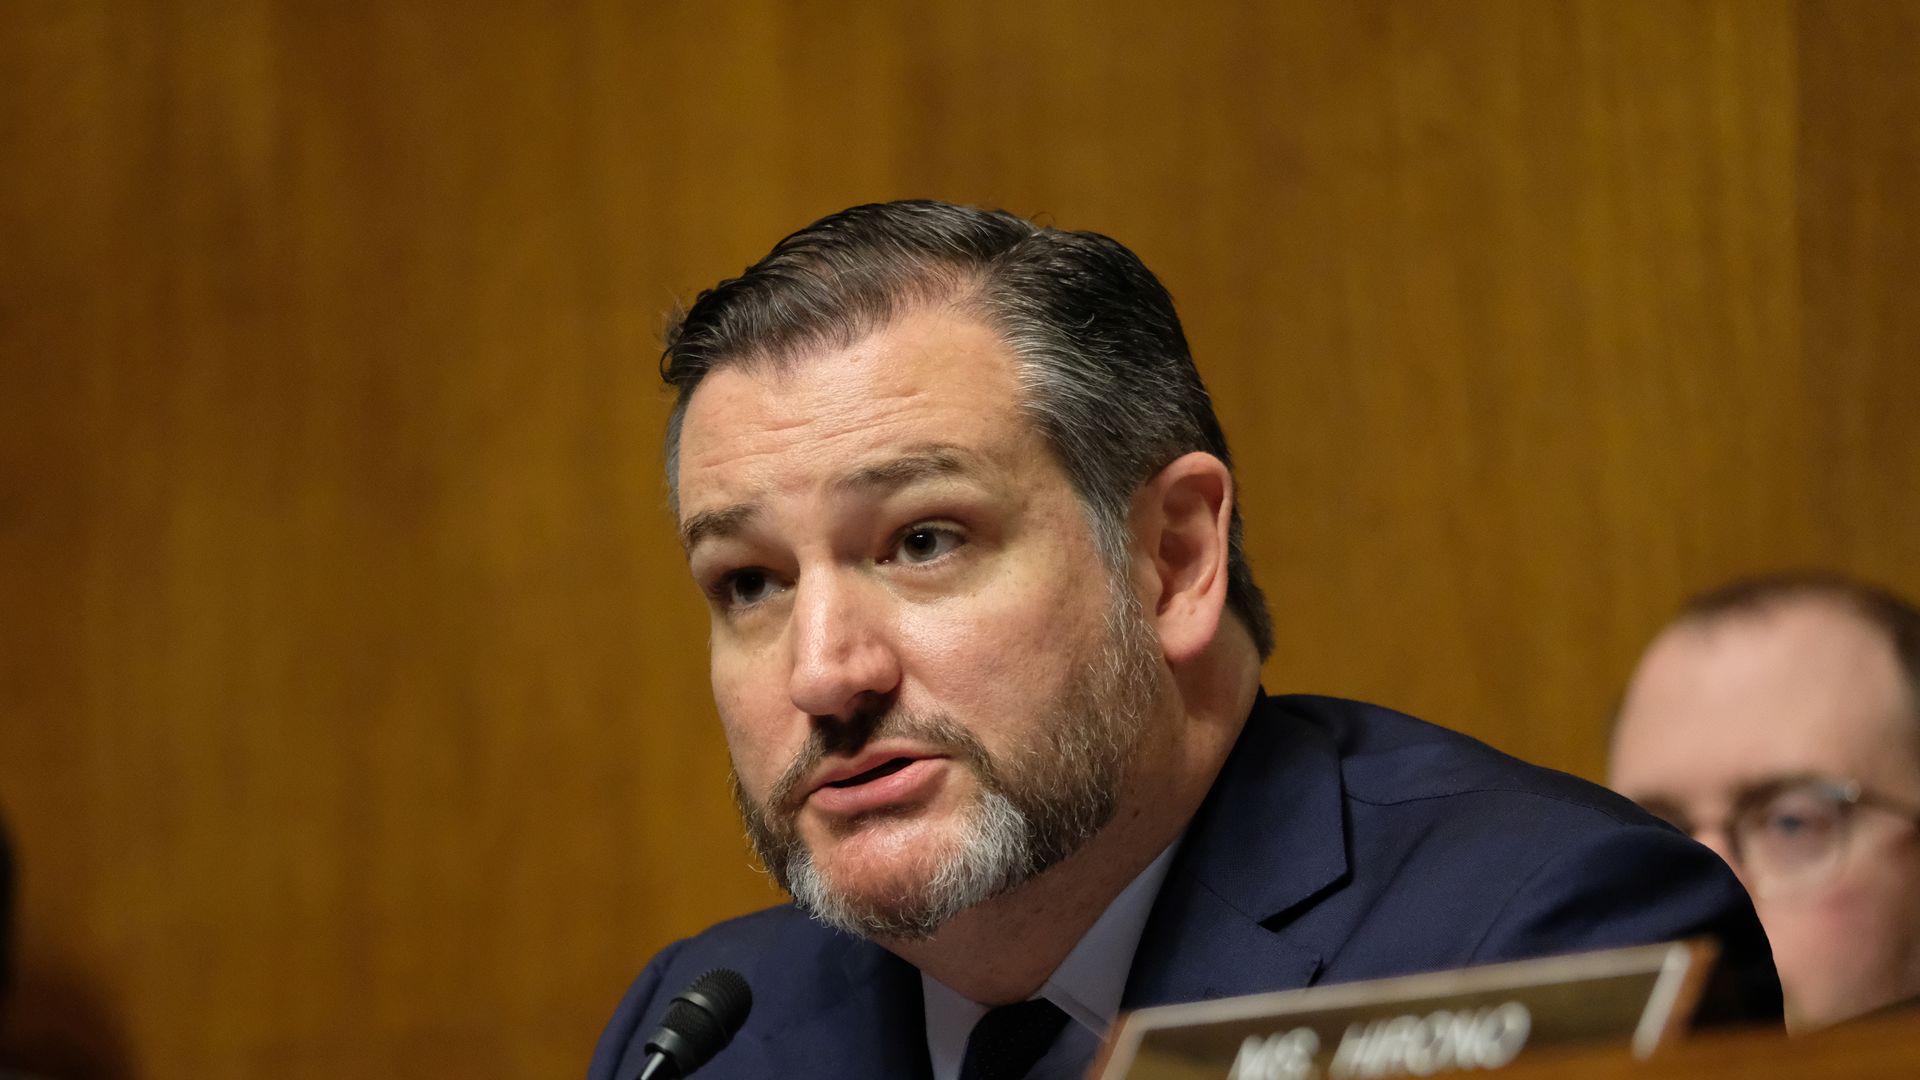 A photo of Sen. Ted Cruz speaking at a Senate Judiciary Committee hearing on tech censorship with Twitter and Facebook.